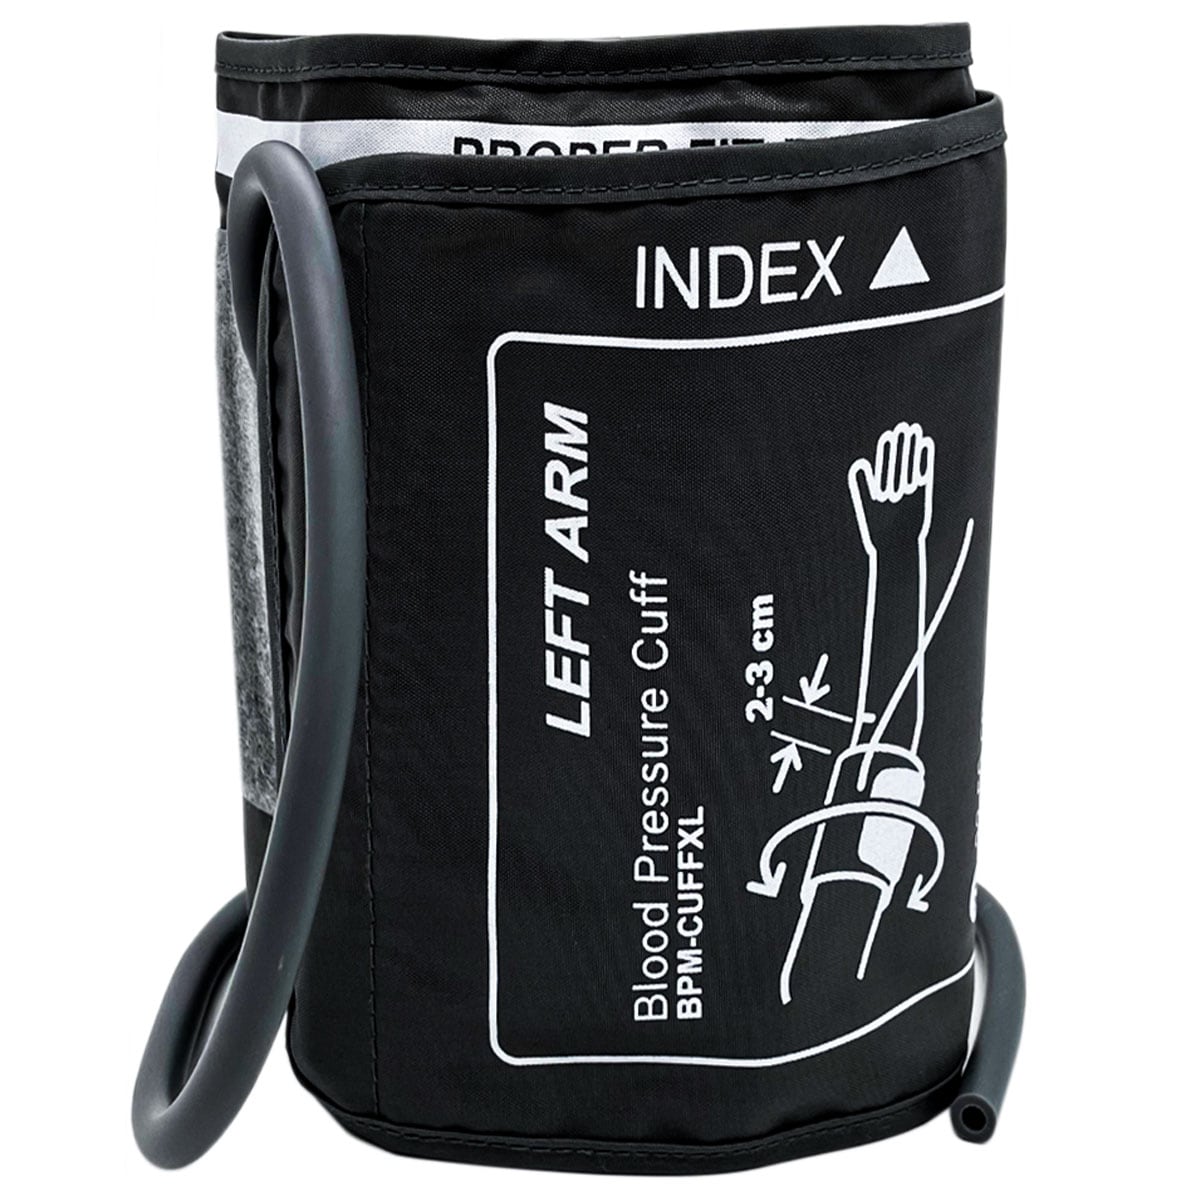 Blood Pressure Monitor Cuff Extra Large 32cm - 50cm (Colour may differ to image shown)